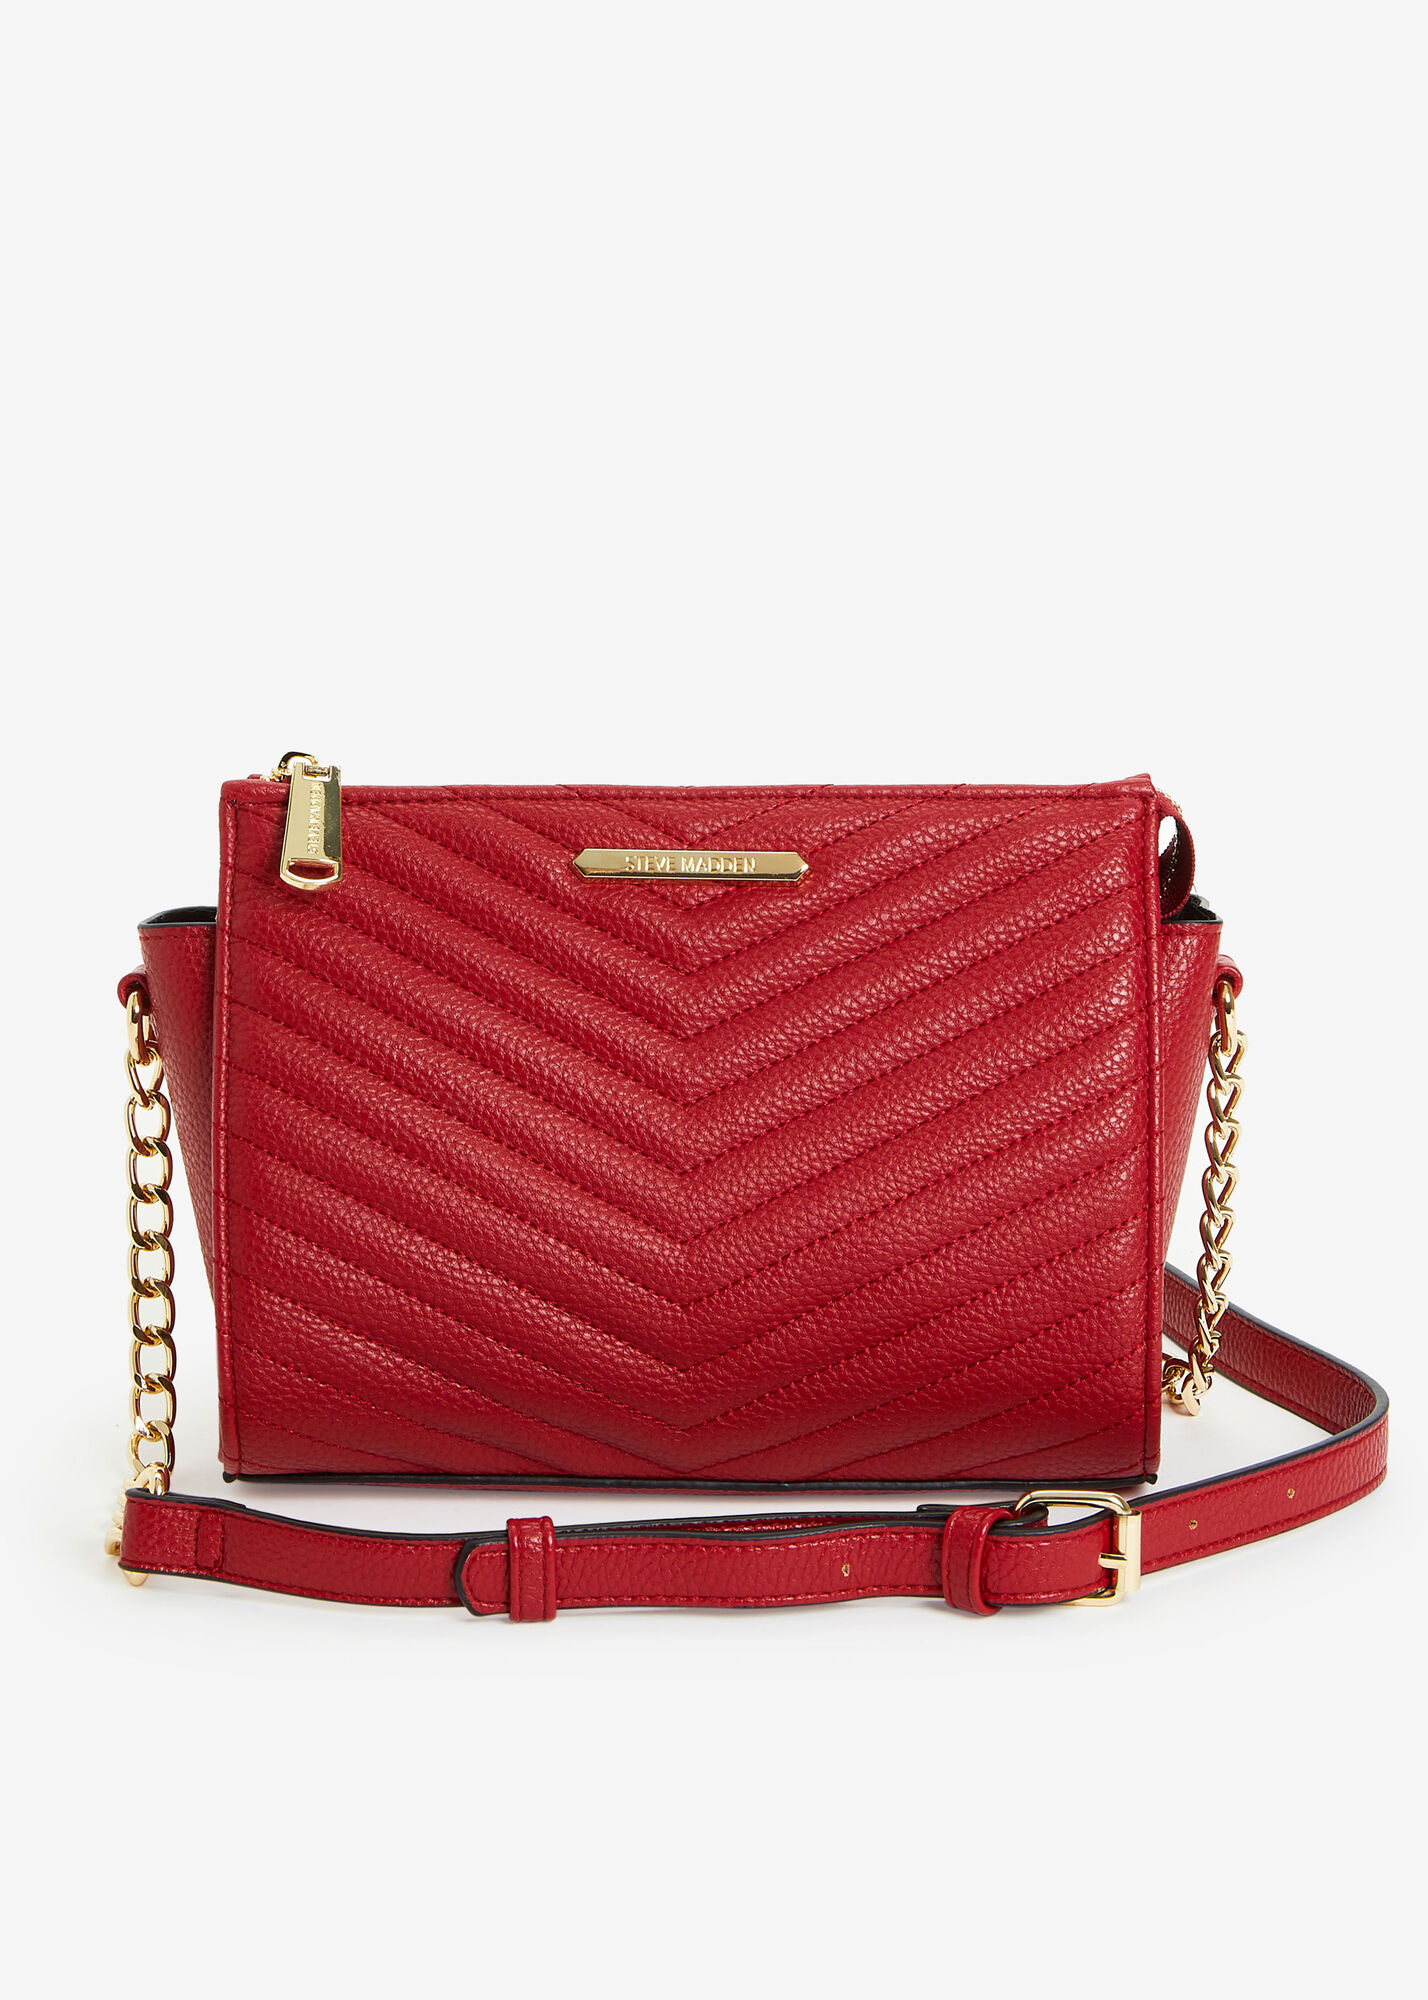 Luxe For Less Steve Madden Lexi Quilted Faux Leather Bag